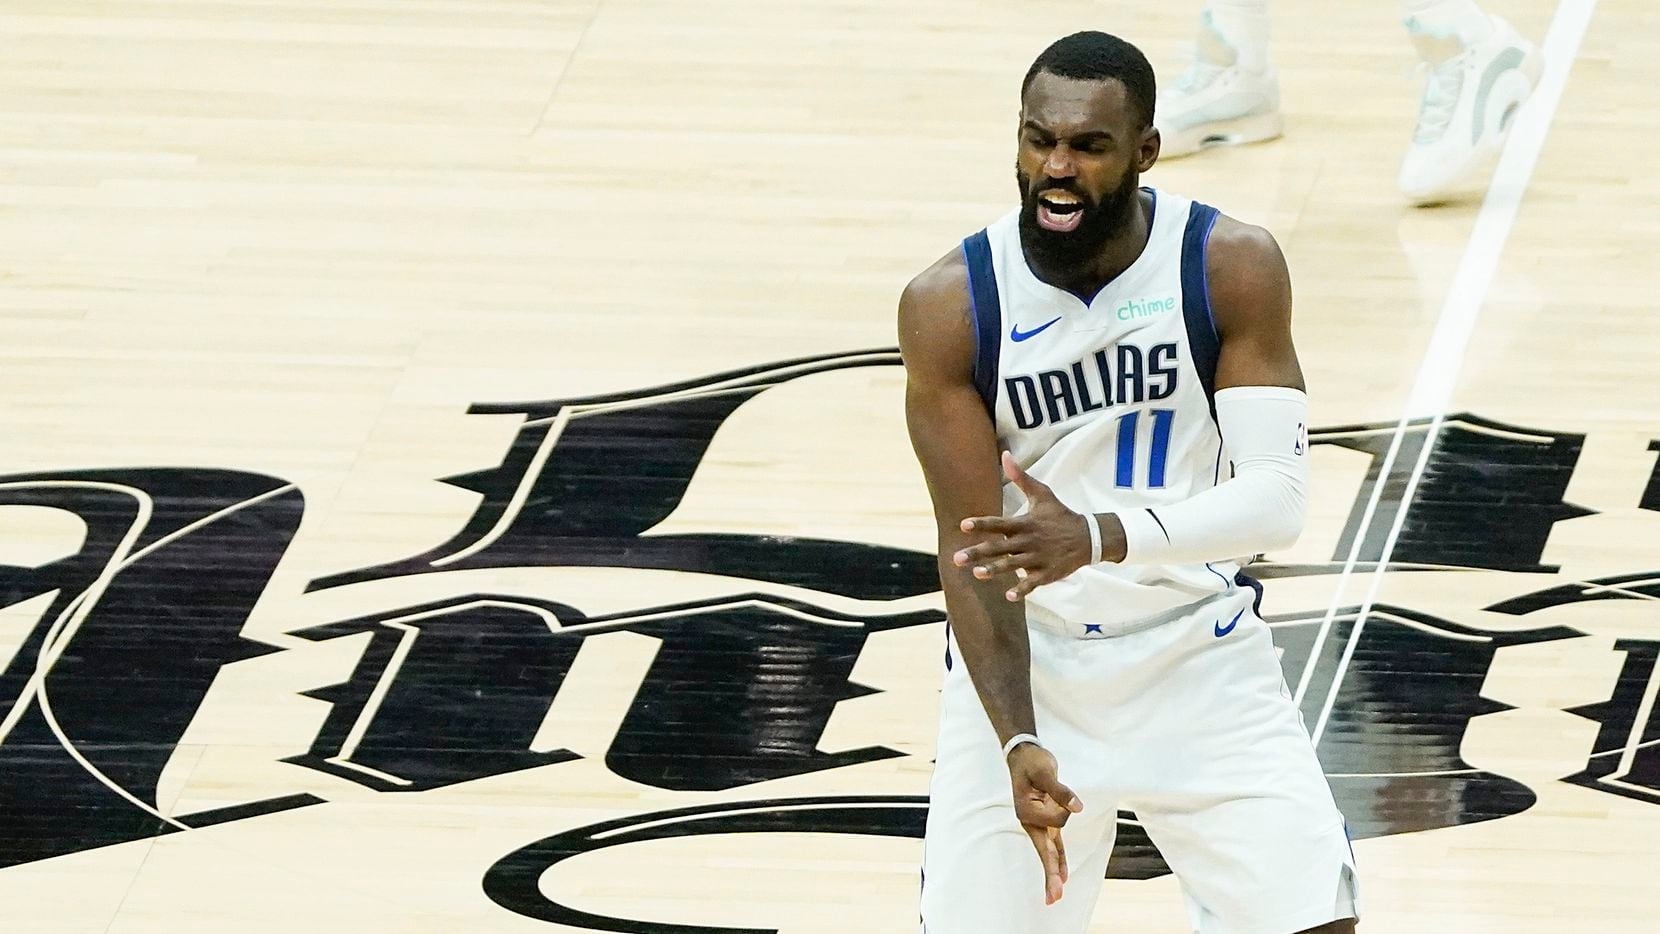 Dallas Mavericks forward Tim Hardaway Jr. (11) celebrates after hitting a 3-pointer during the third quarter of an NBA playoff basketball game against the LA Clippers at the Staples Center on Wednesday, June 2, 2021, in Los Angeles.